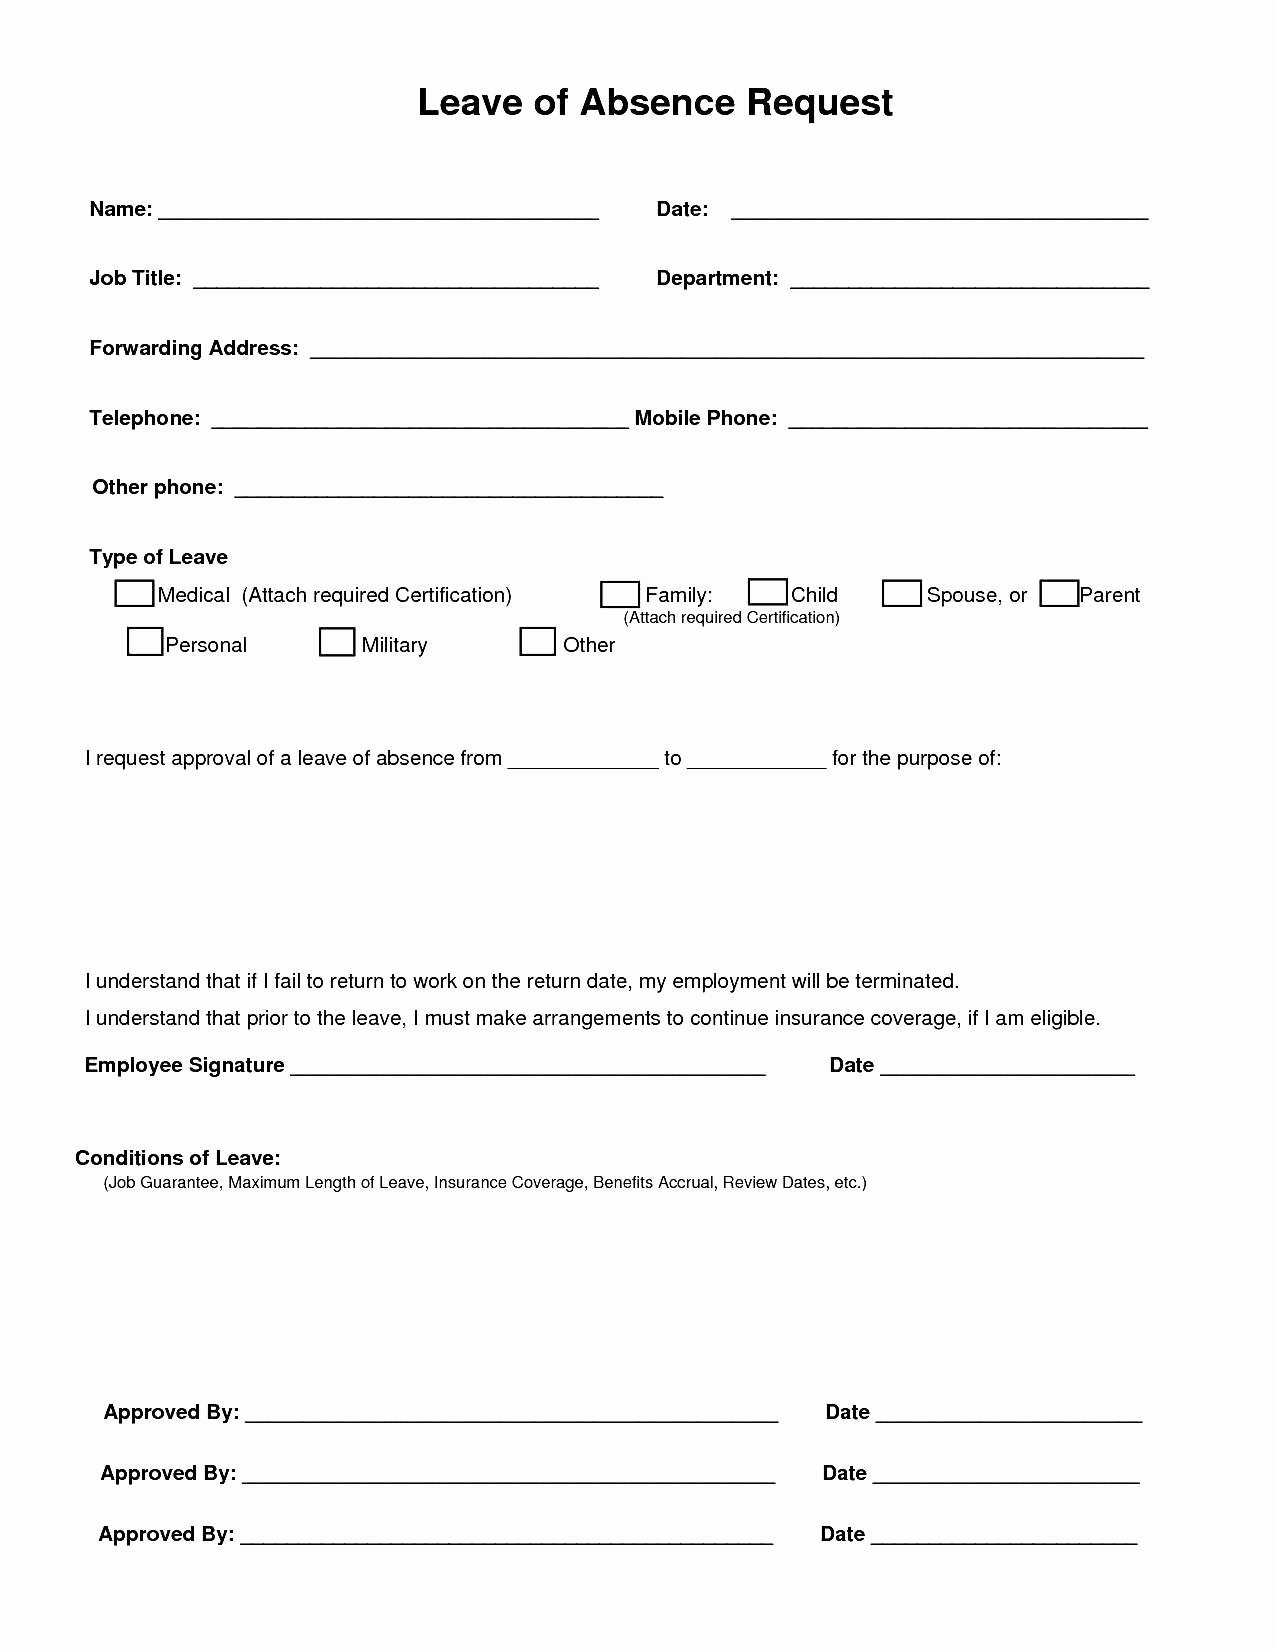 Leave Request form Template Elegant Annual Leave Application form Mughals